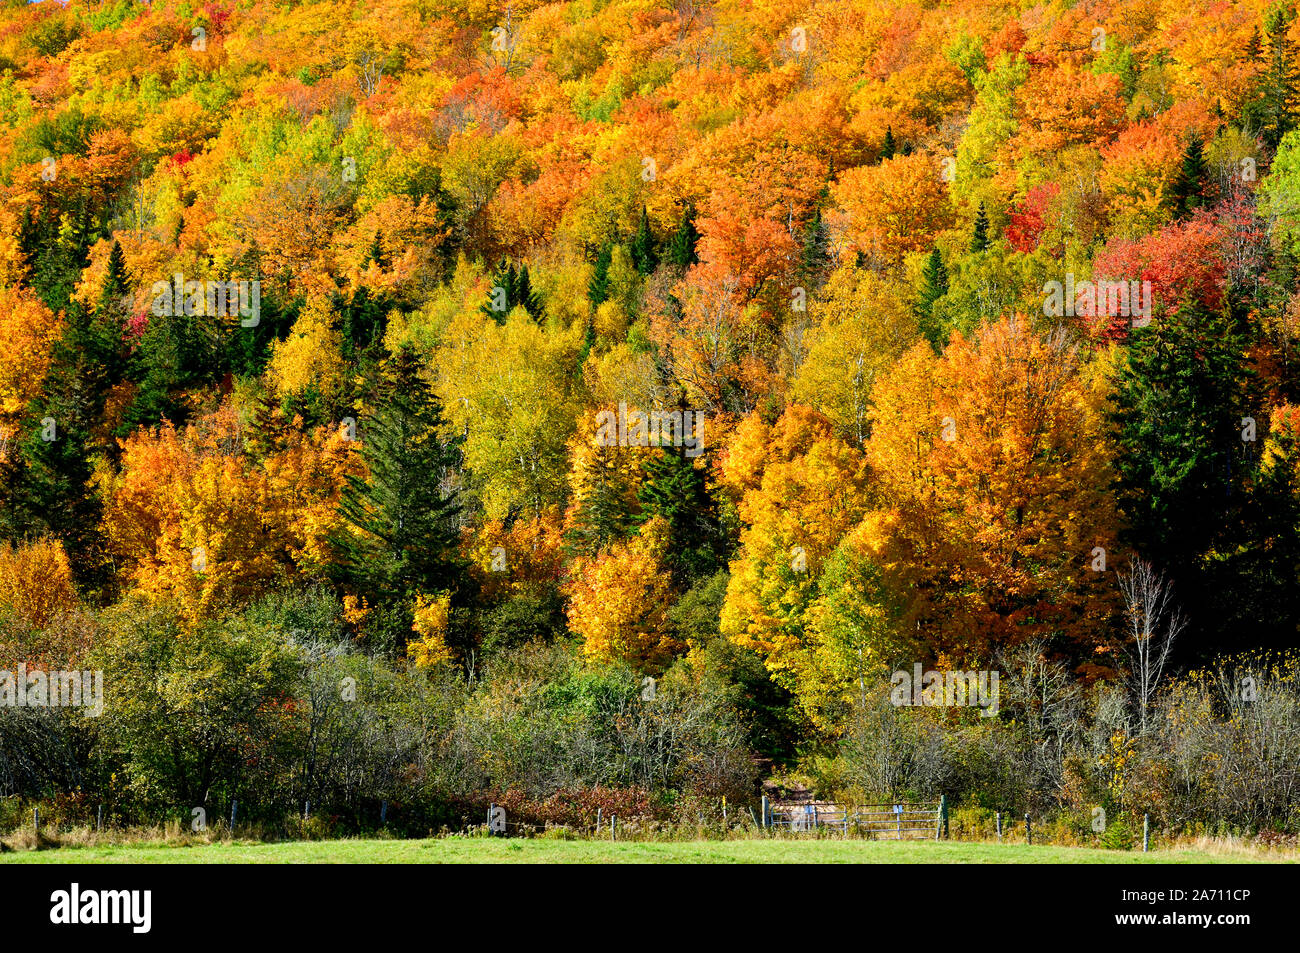 An image of a hardwood ridge with its deciduous forest turning the bright reds and yellow colors of fall in a rural area near Sussex New Brunswick, Ca Stock Photo